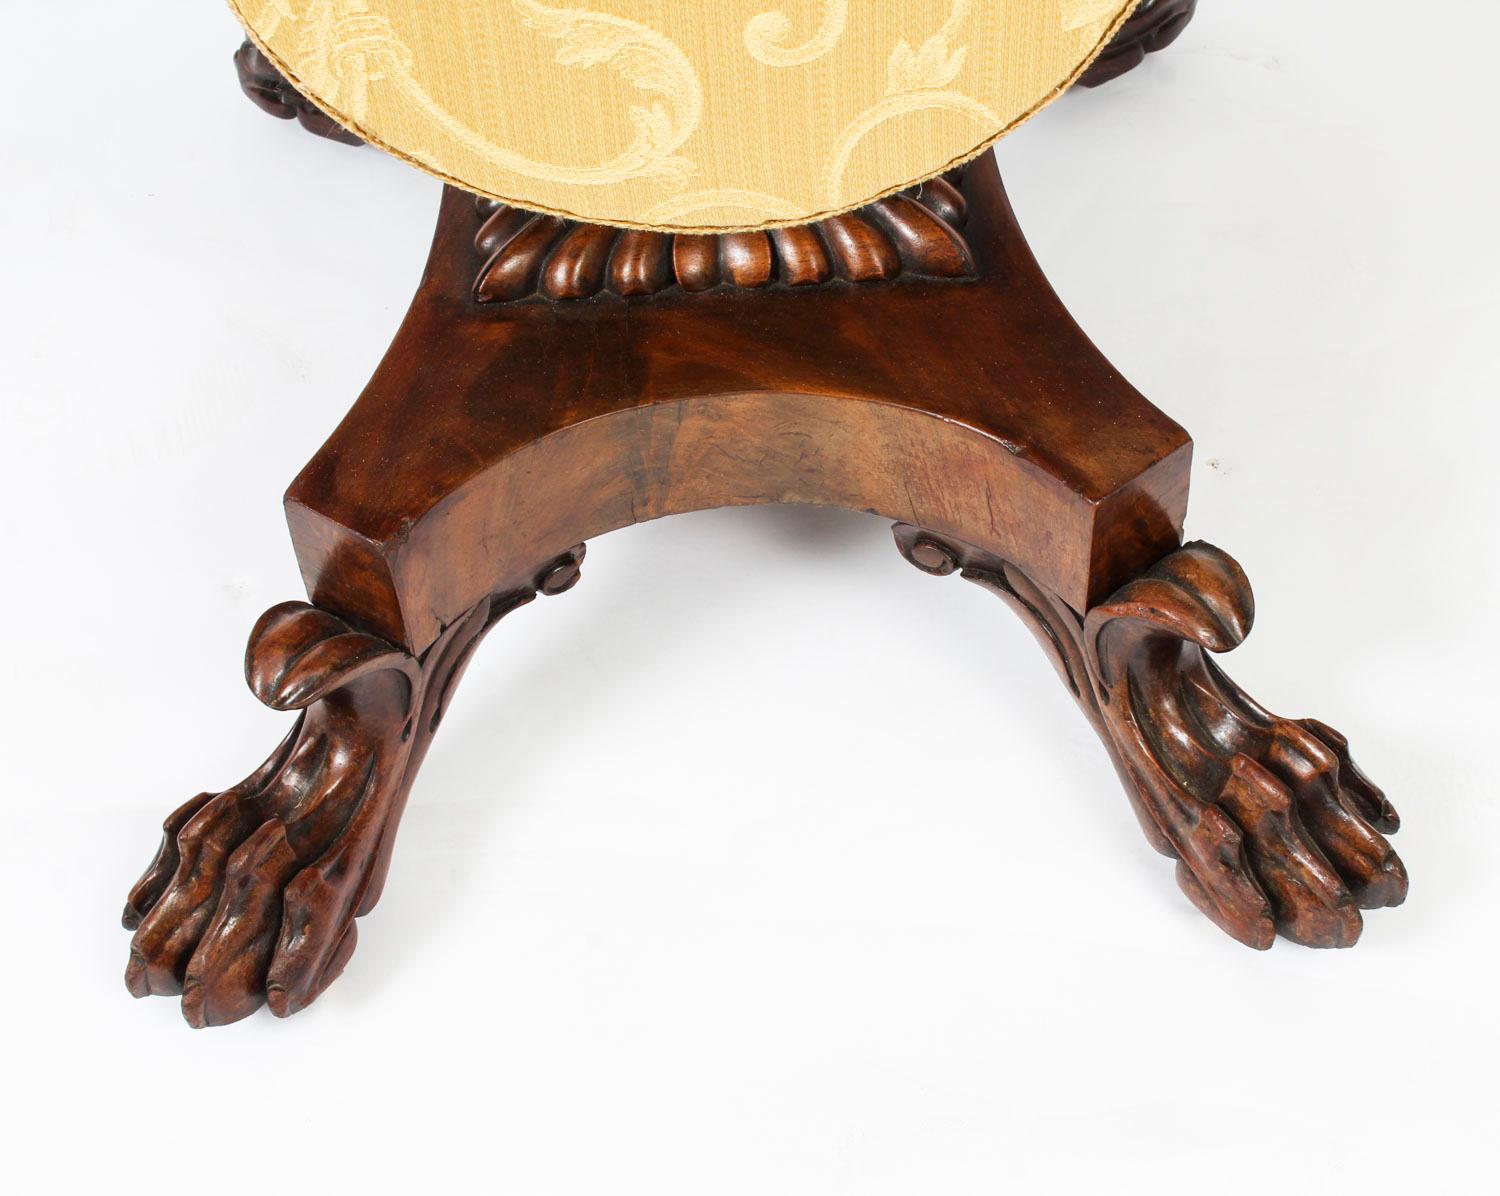 Antique William IV Drop-Leaf Work Occasional Table Flame Mahogany, 19th Century For Sale 7